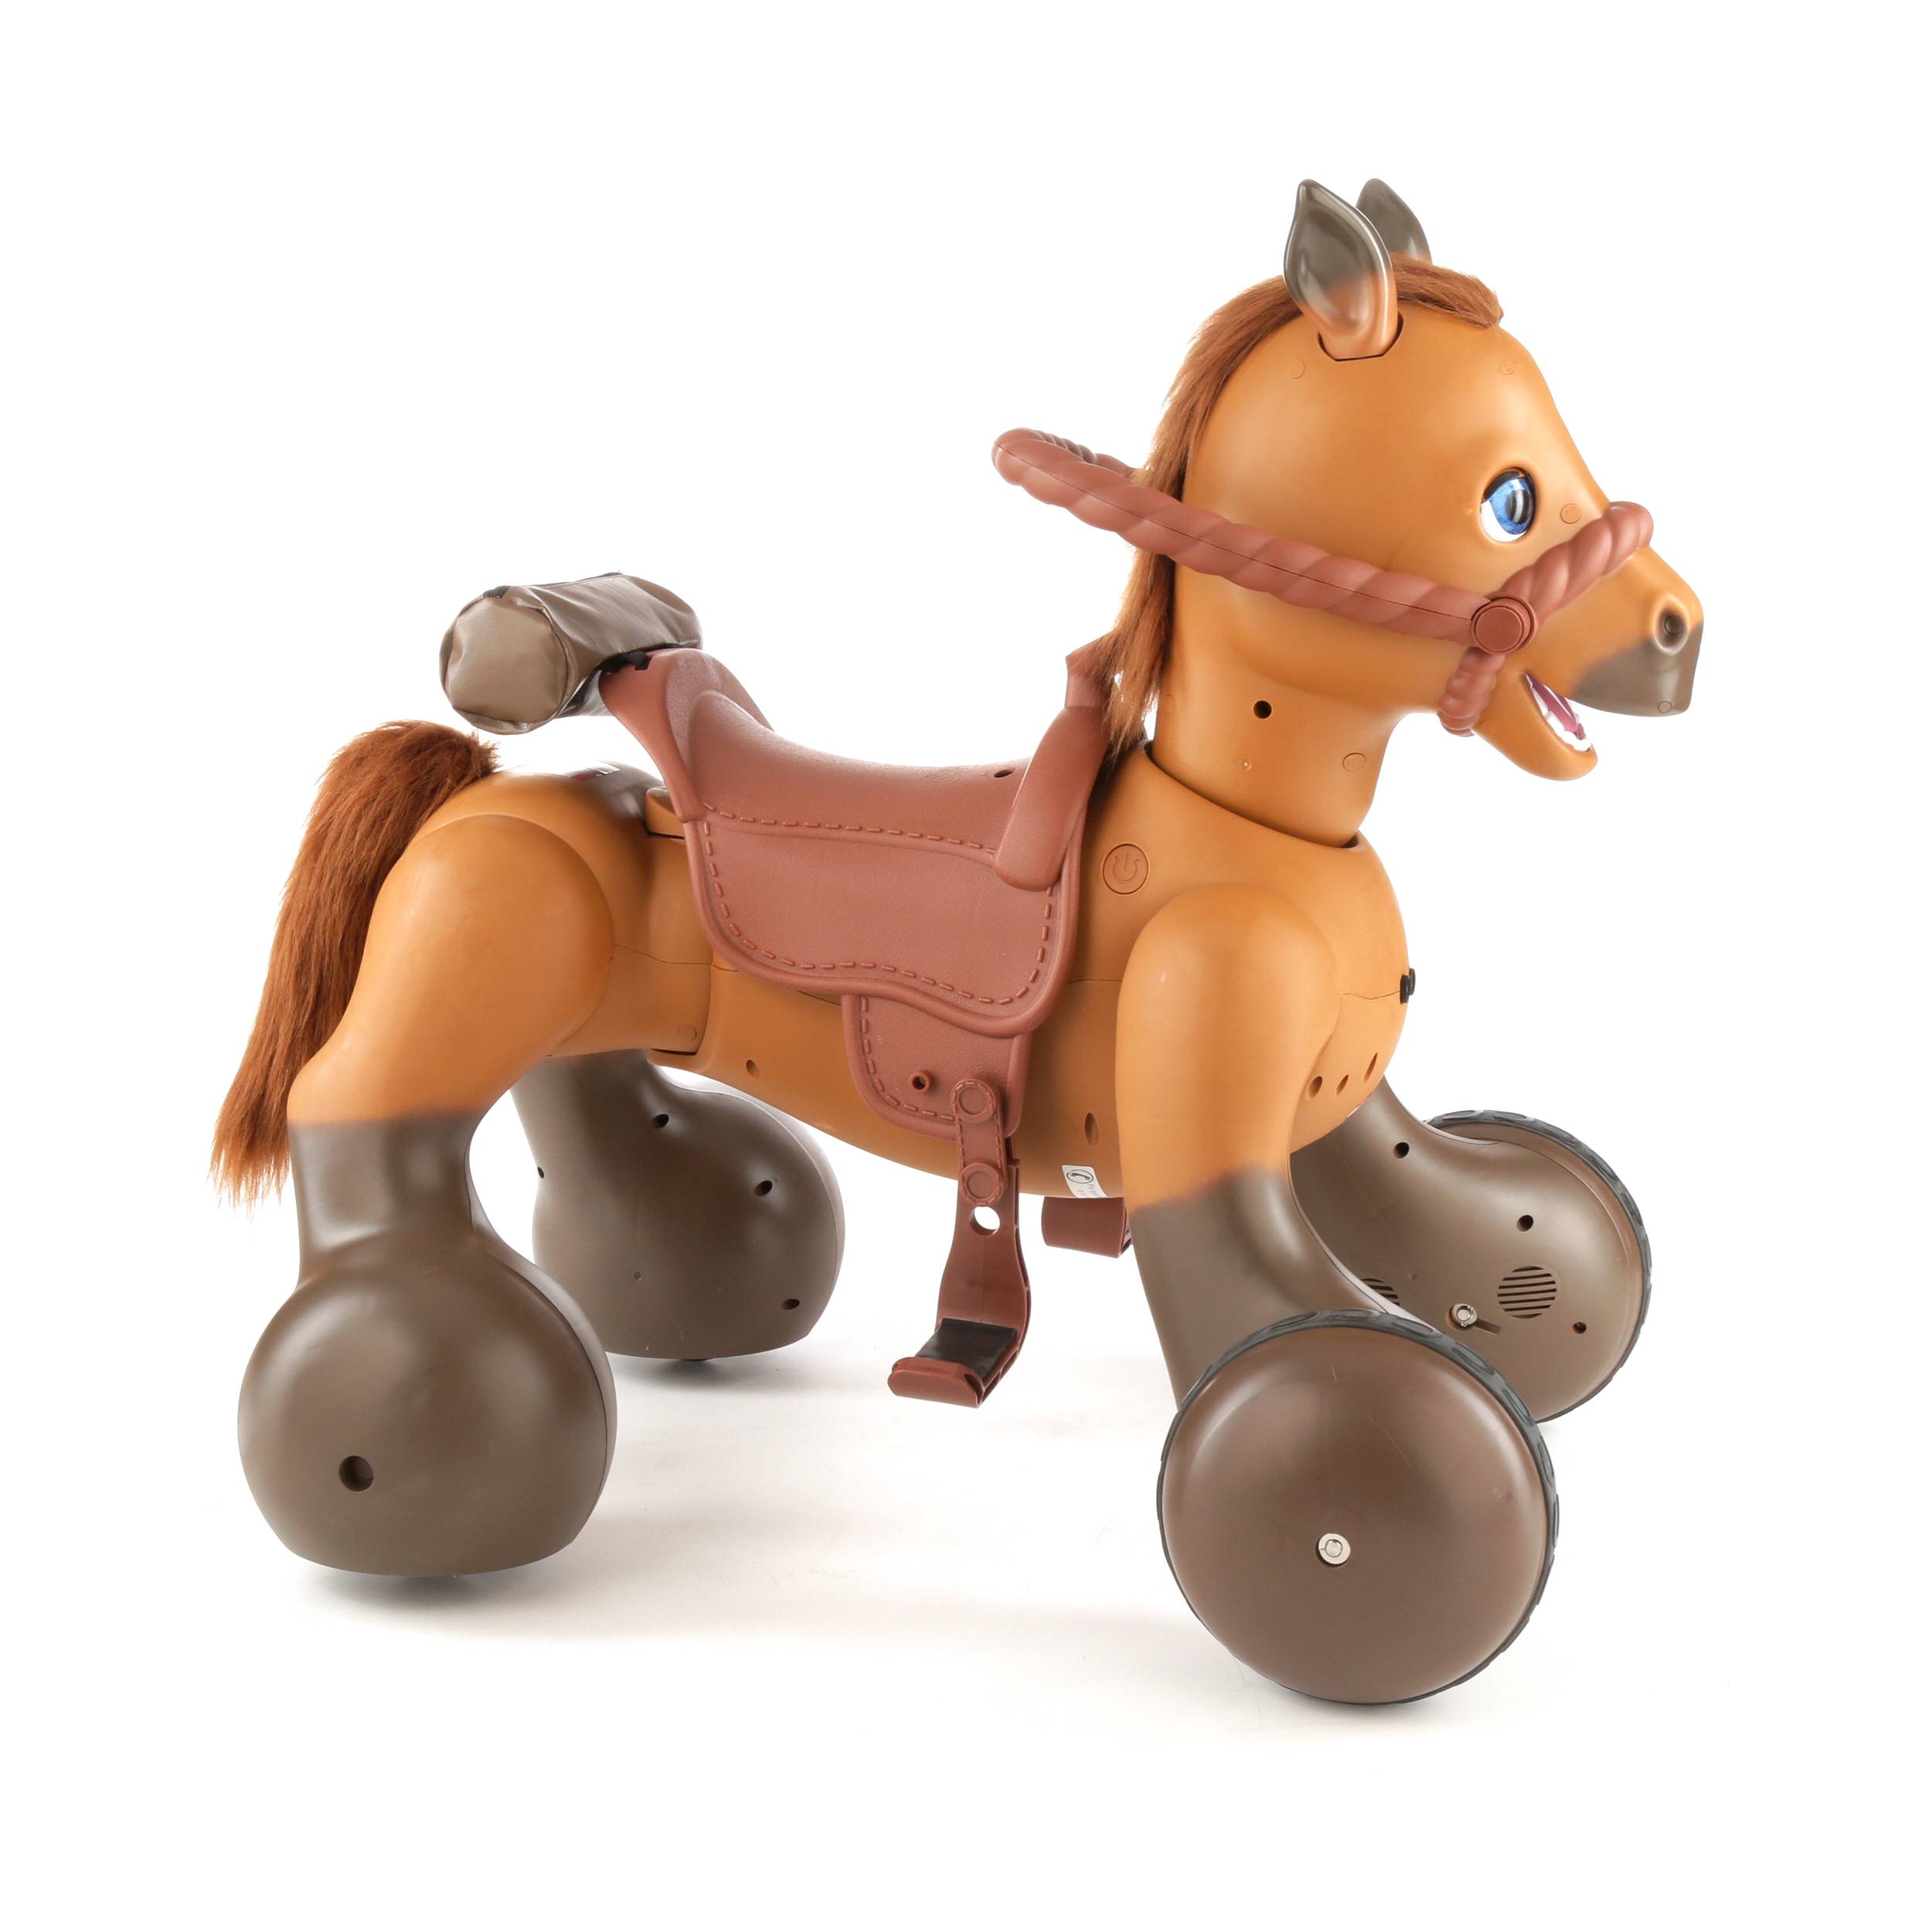 toy riding horse that moves